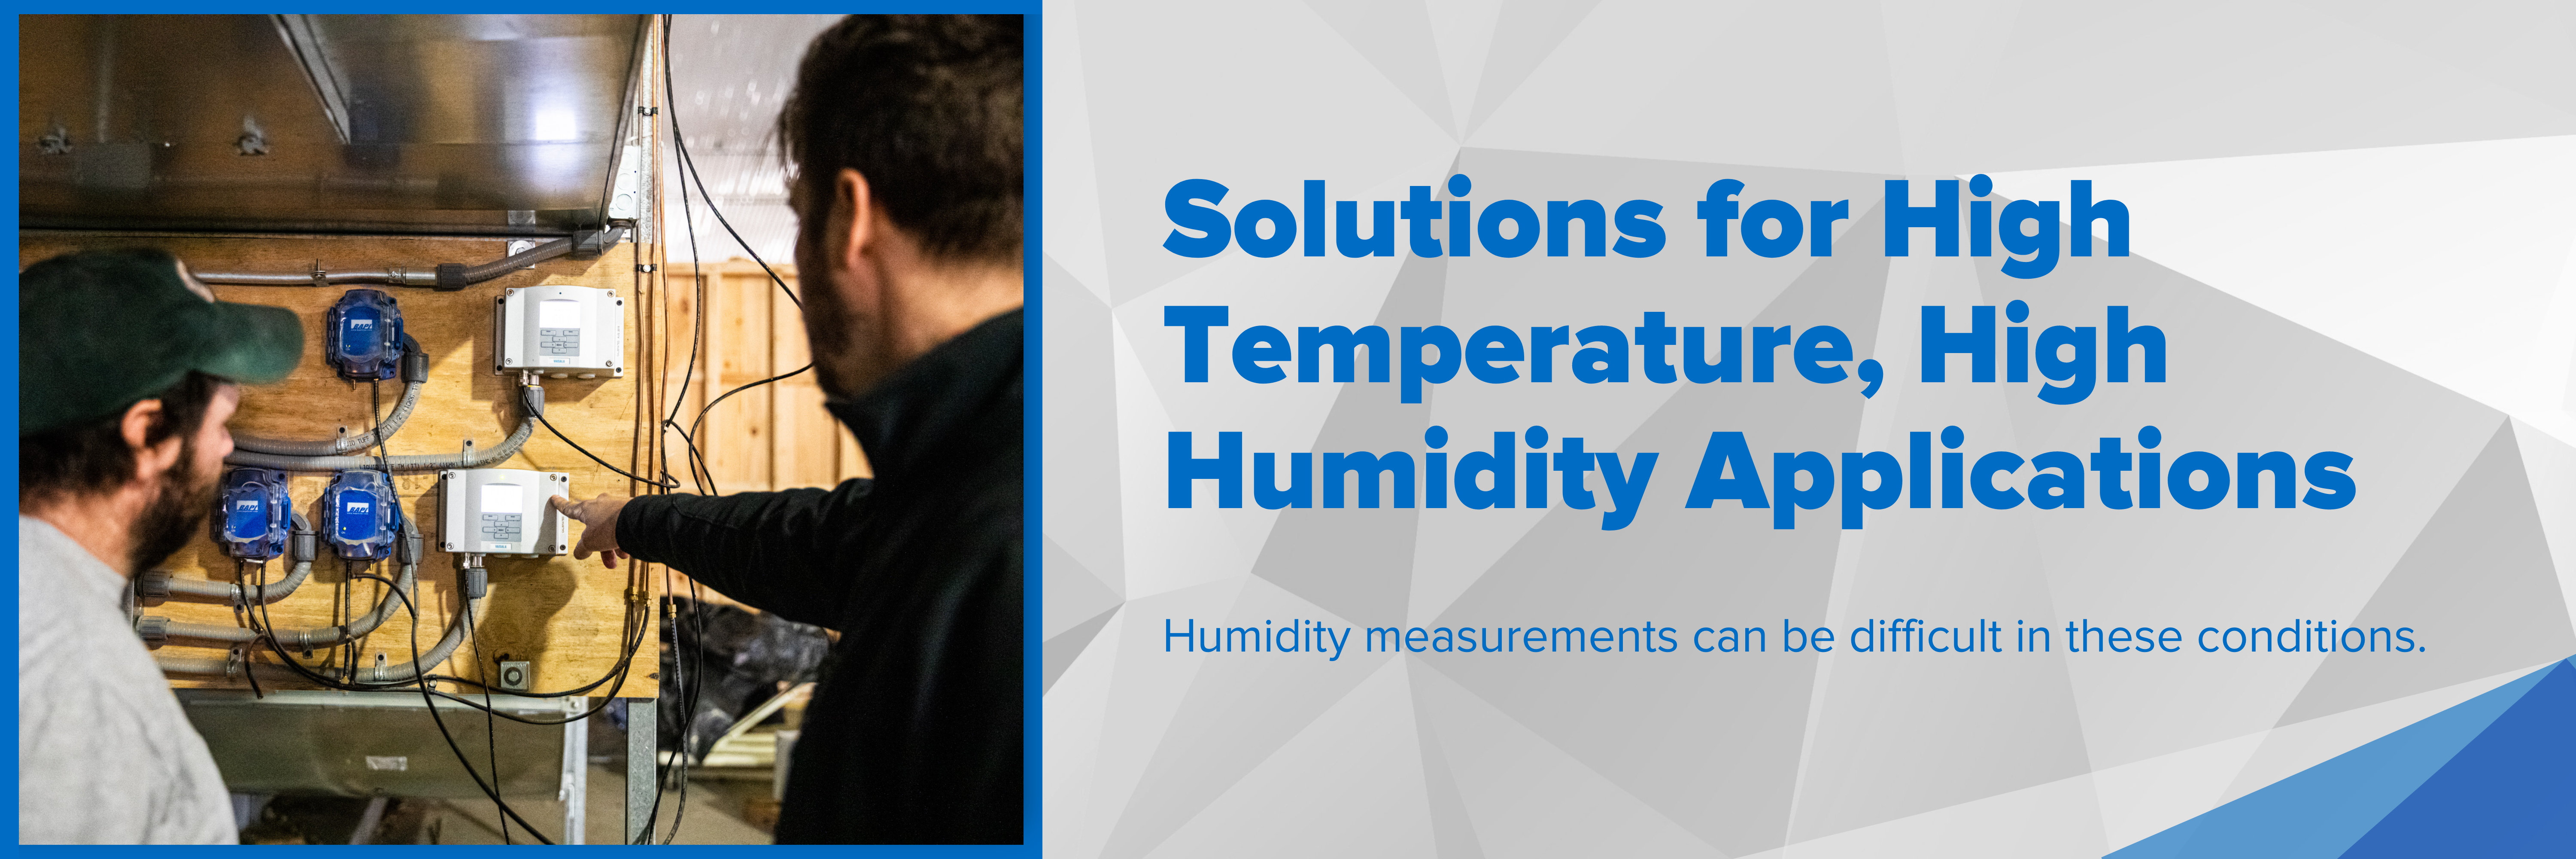 Header image with text "Solutions for High Temperature, High Humidity Applications."